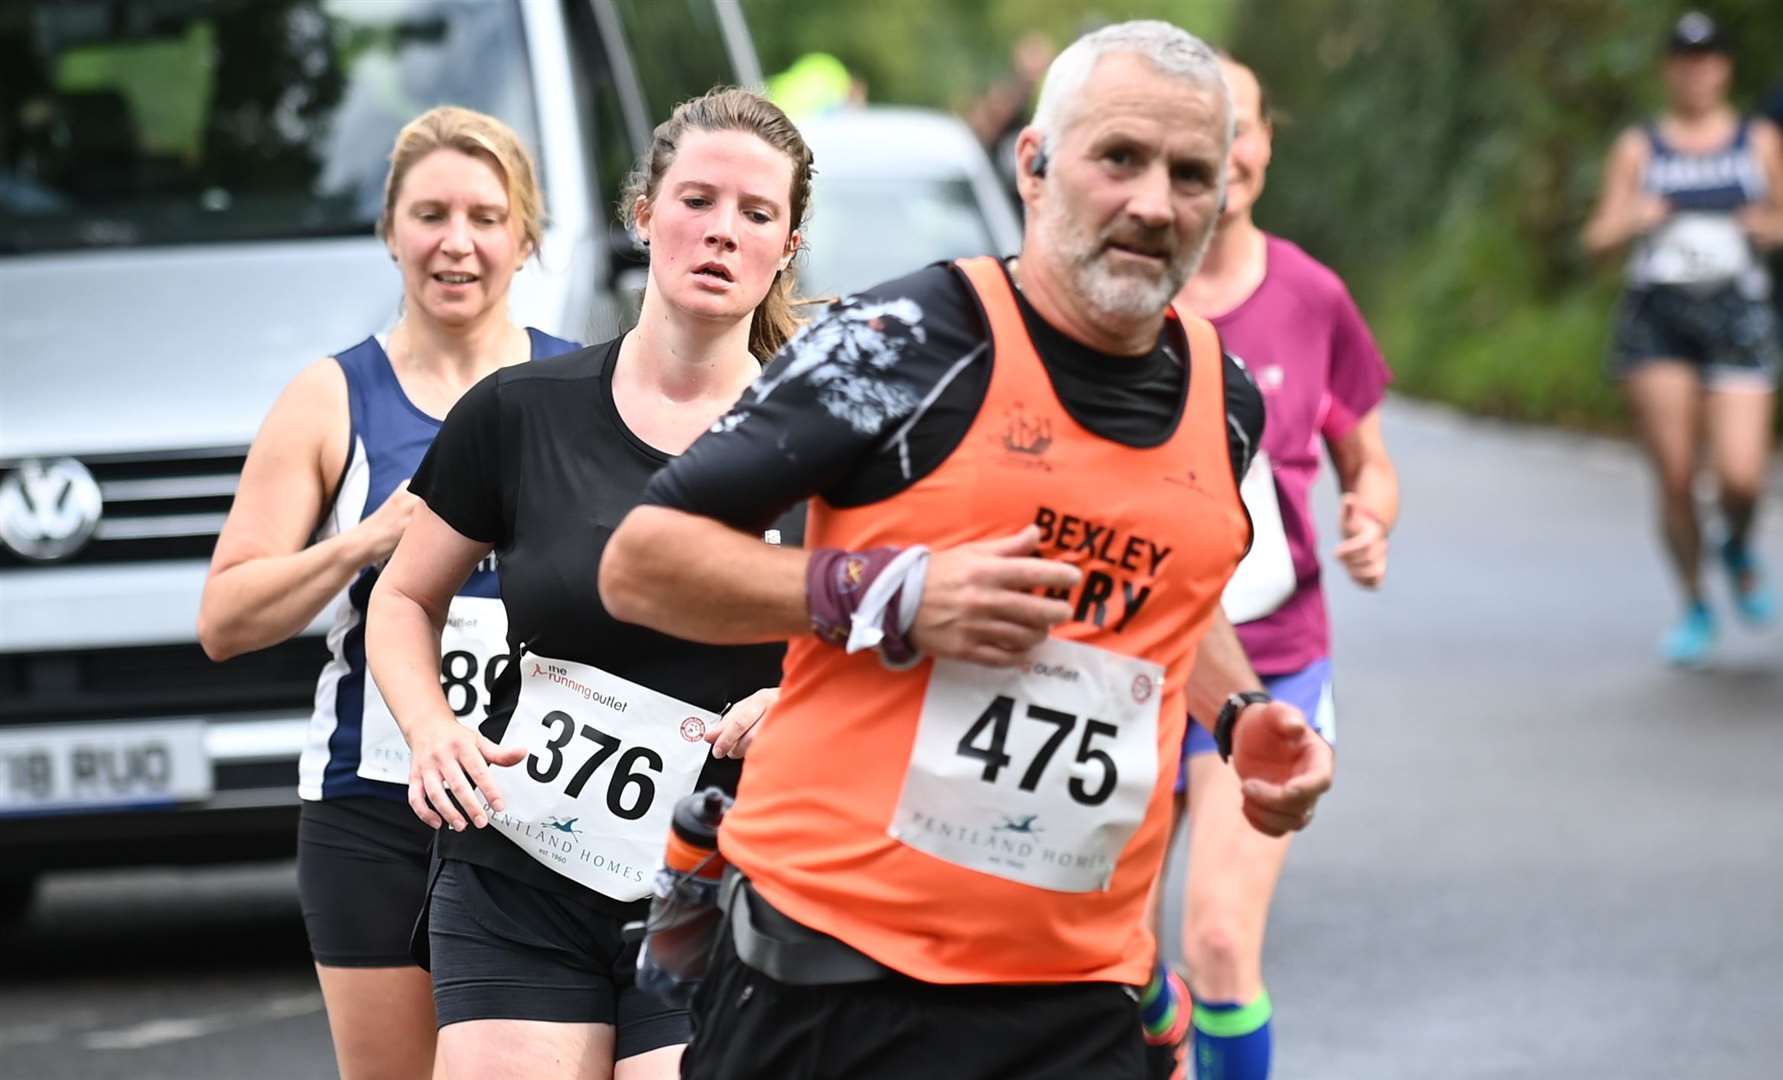 Gary Witt of Bexley AC. Picture: Barry Goodwin (49790252)